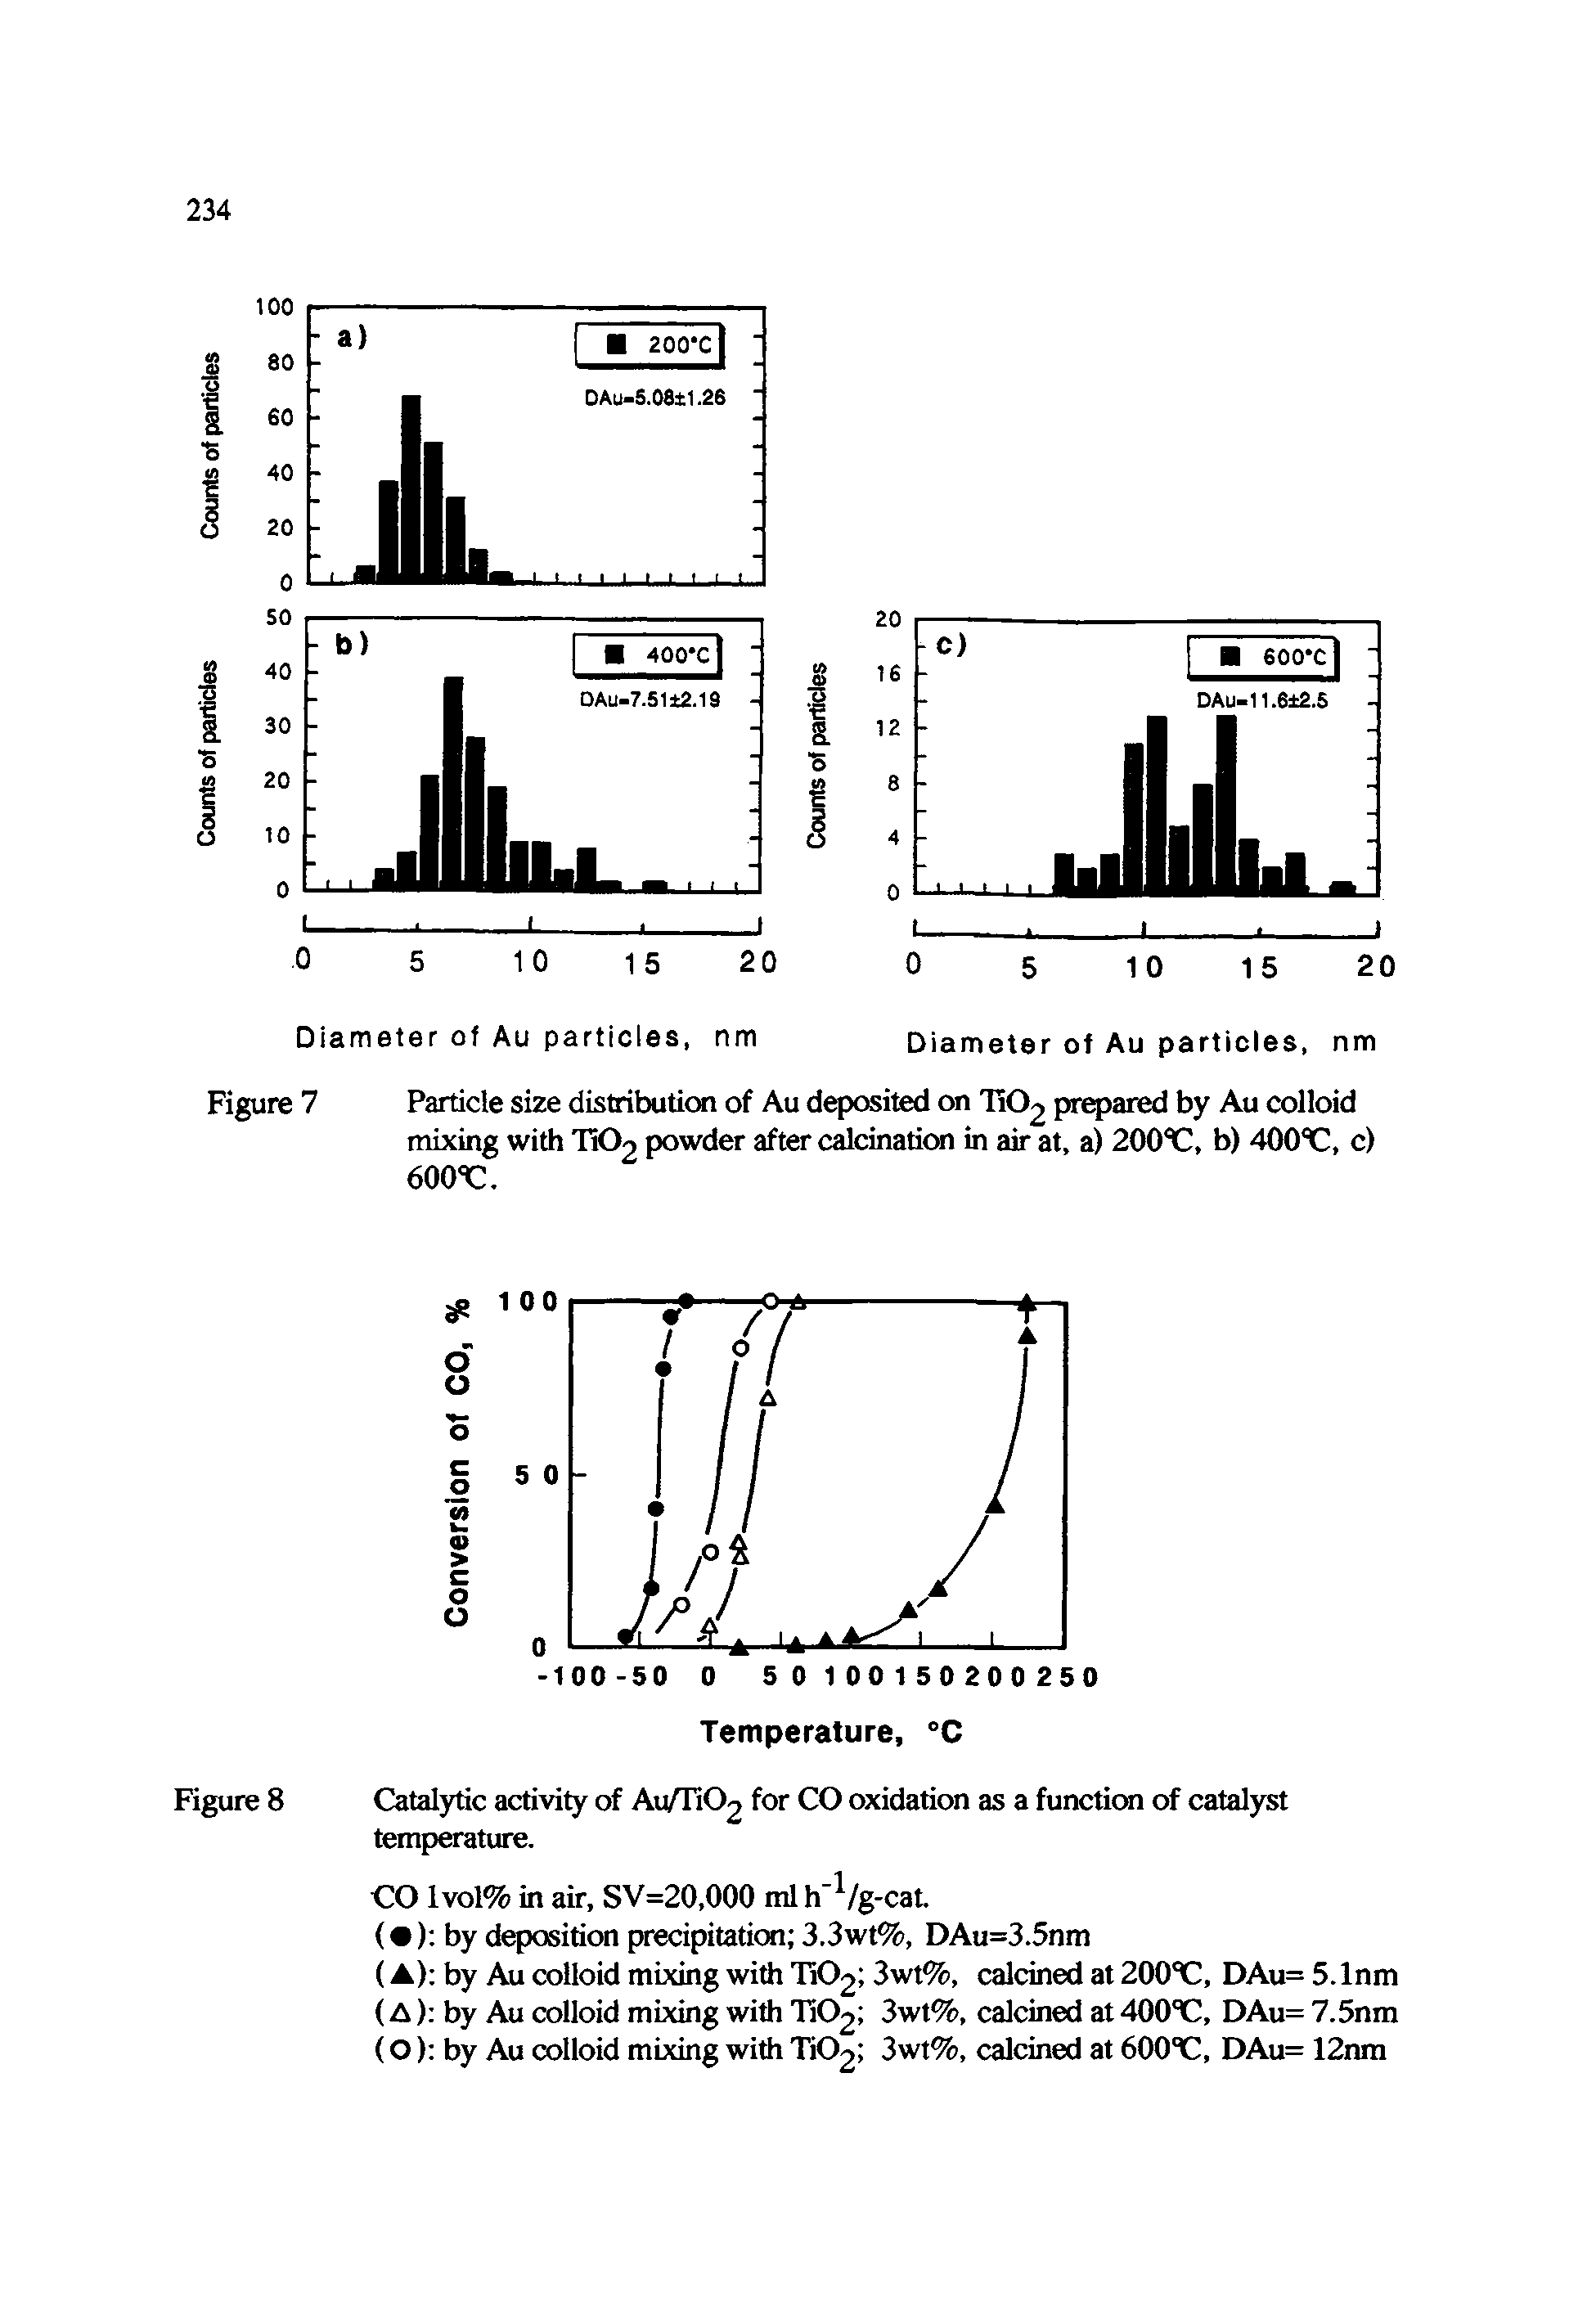 Figure 7 Particle size distribution of Au deposited on n02 prqpared by Au colloid mixing with V1O2 powder after cdcination in air at, a) 200, b) 400 C, c) 600 C.